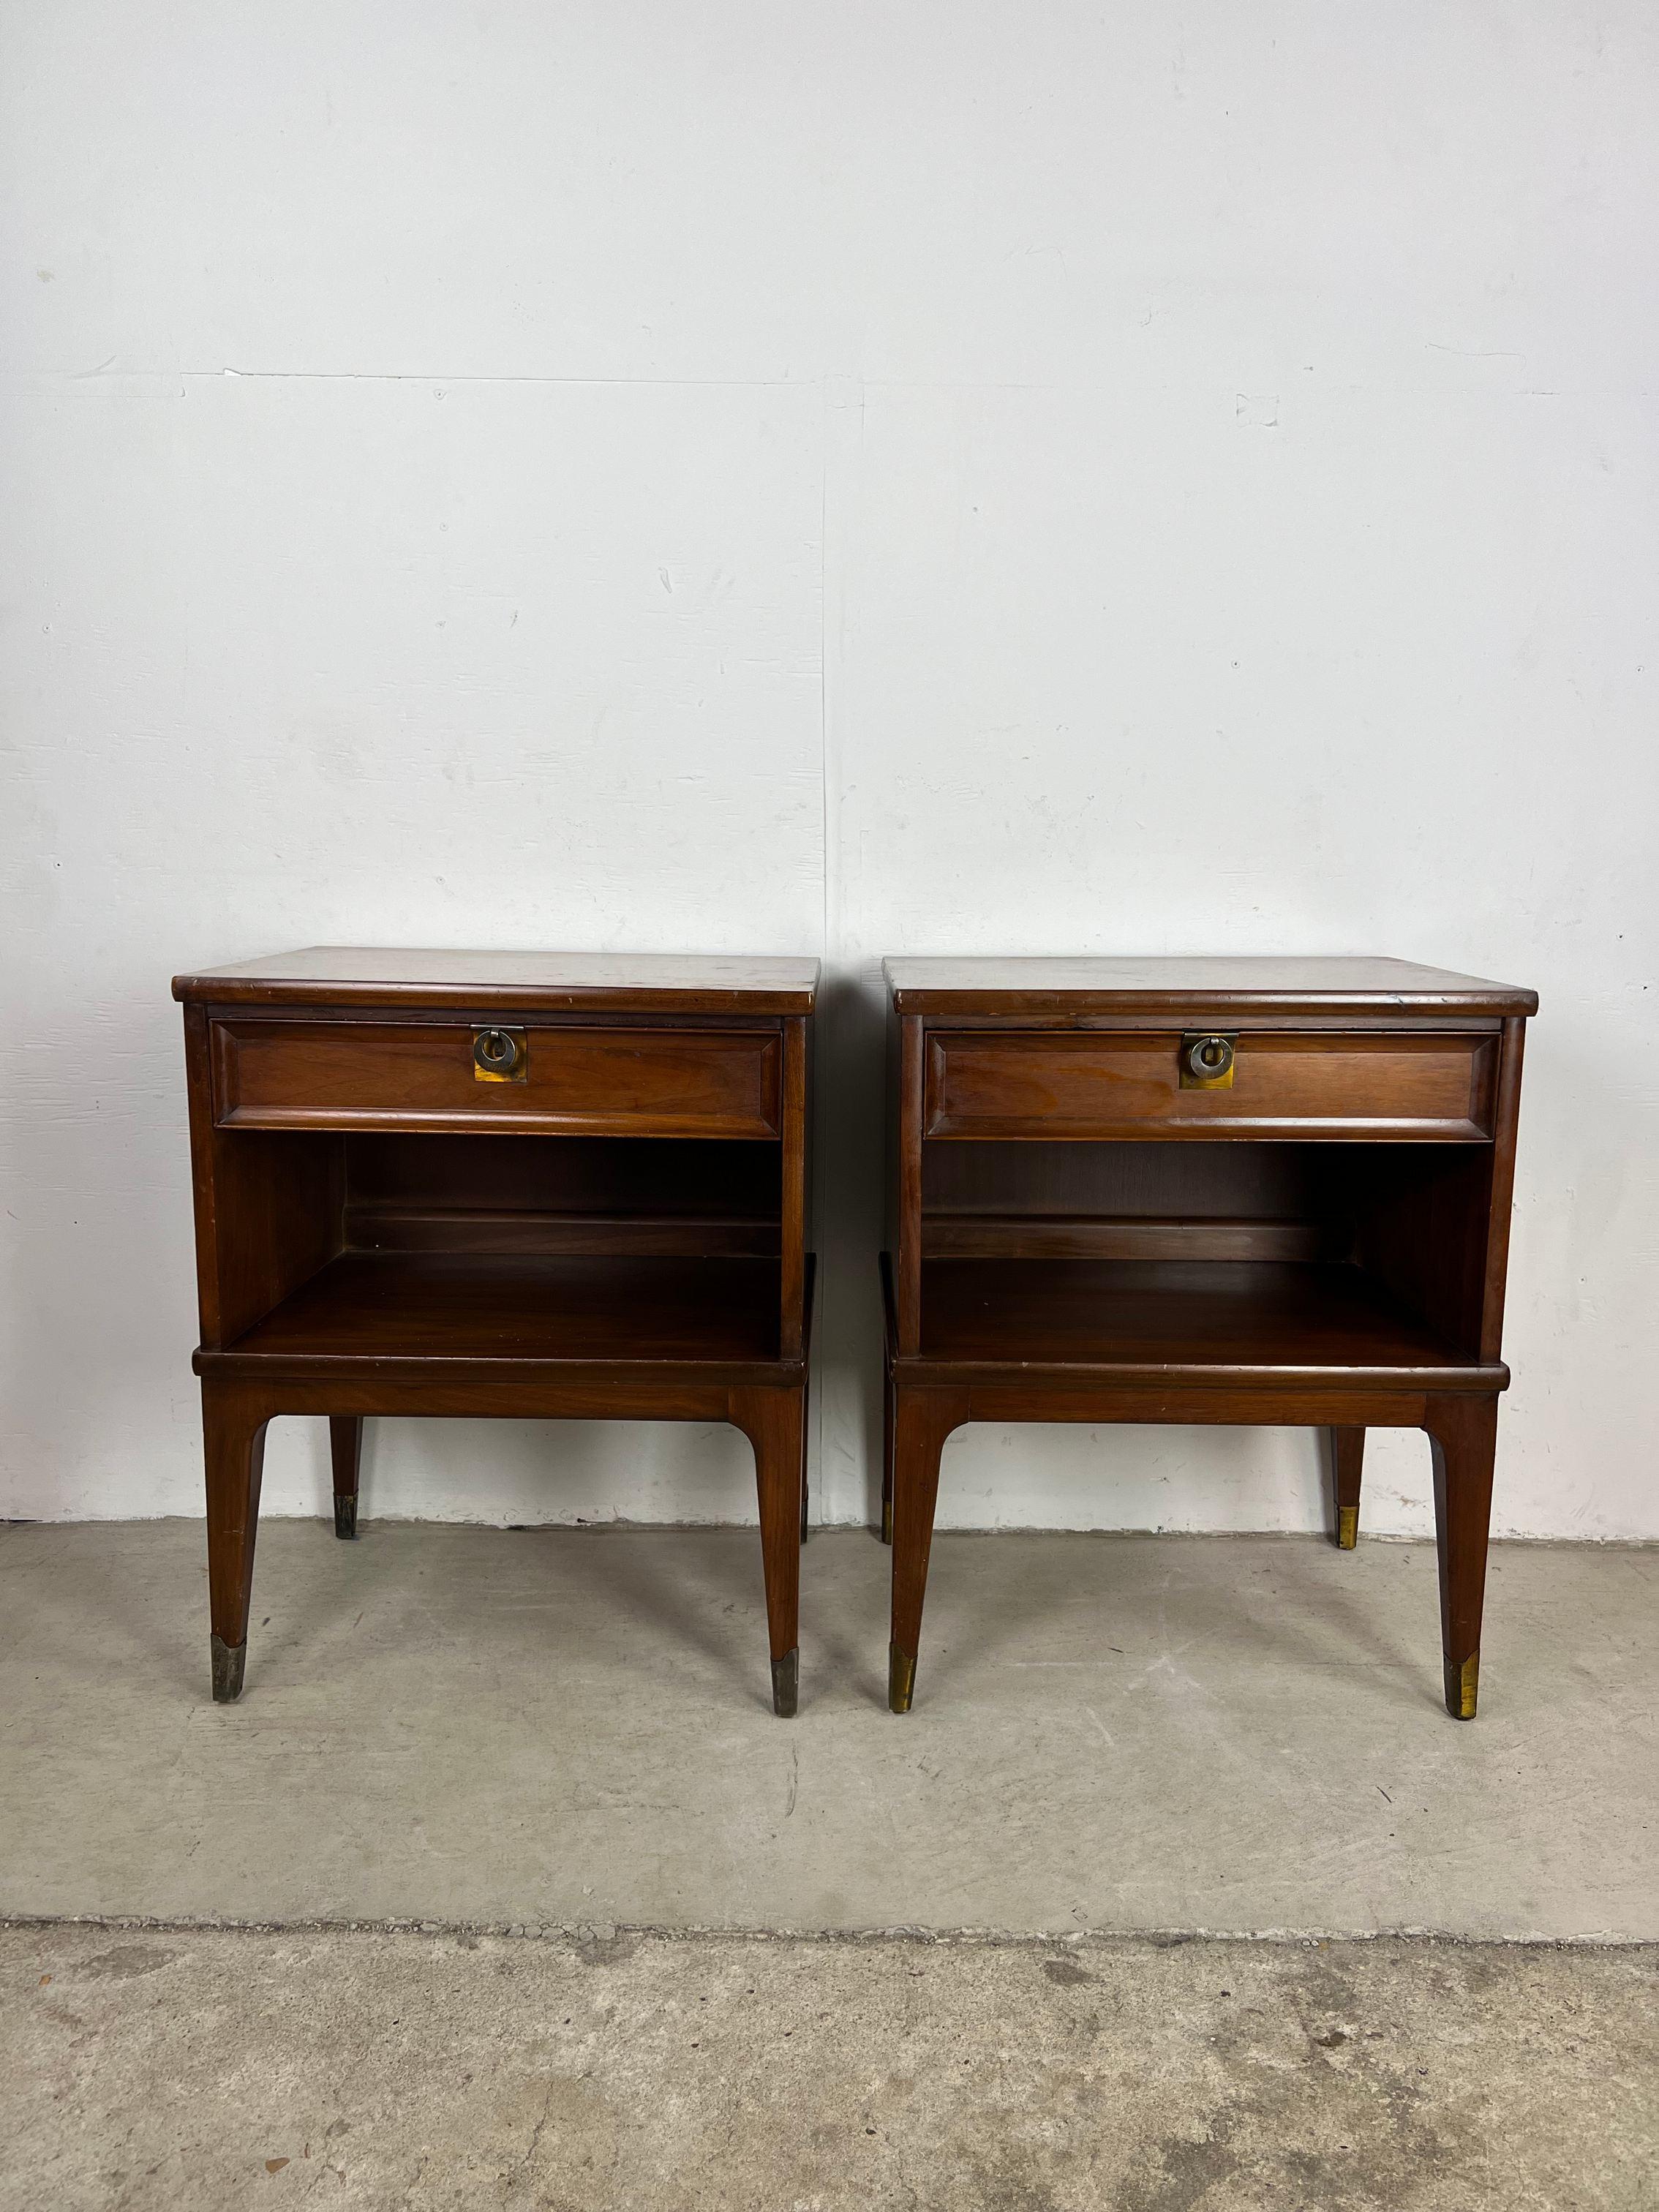 This pair of mid century modern nightstands feature hardwood construction, original walnut finish, single dovetail drawer with brass accented hardware, opened storage underneath and tall tapered legs.

Matching. lowboy dresser & gentleman's chest